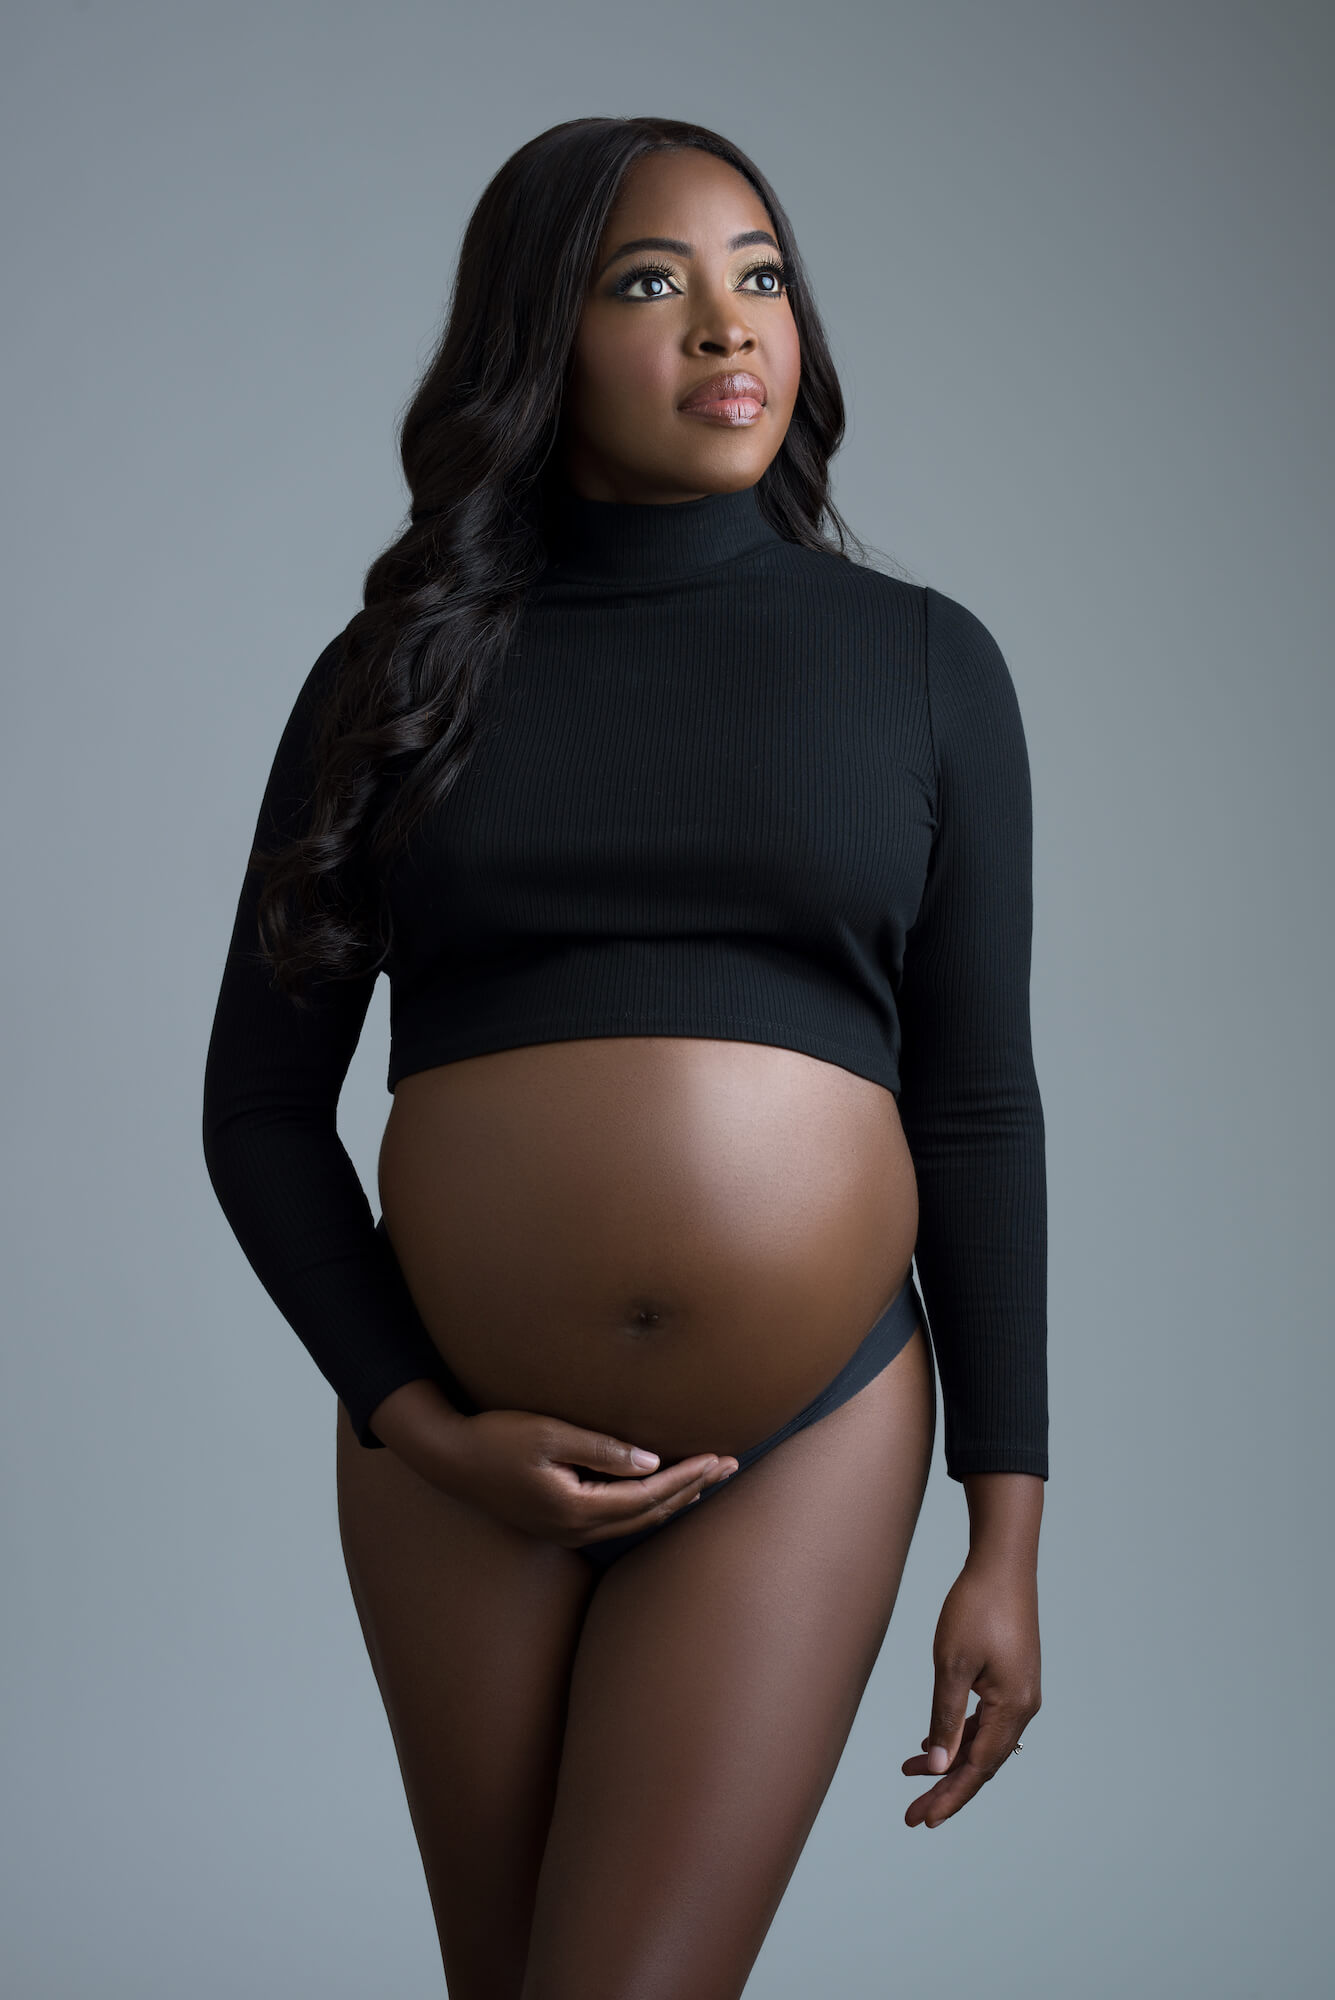 timeless pregnancy photoshoot queens new york